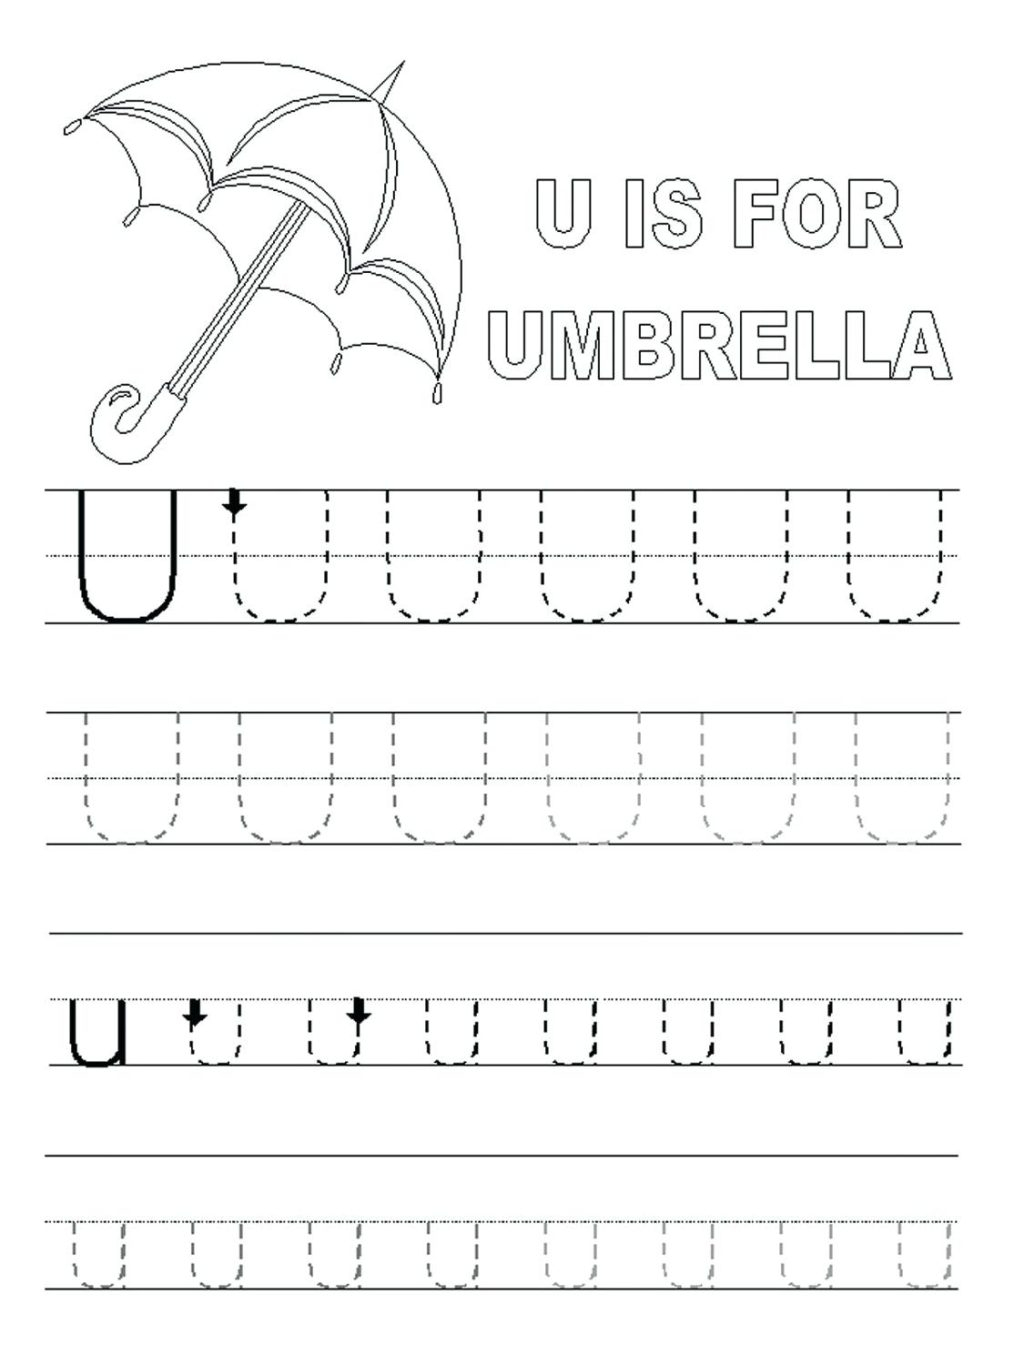 Worksheet ~ Worksheet Freeer Tracing Sheets For Kids Youtube intended for Letter Tracing Youtube